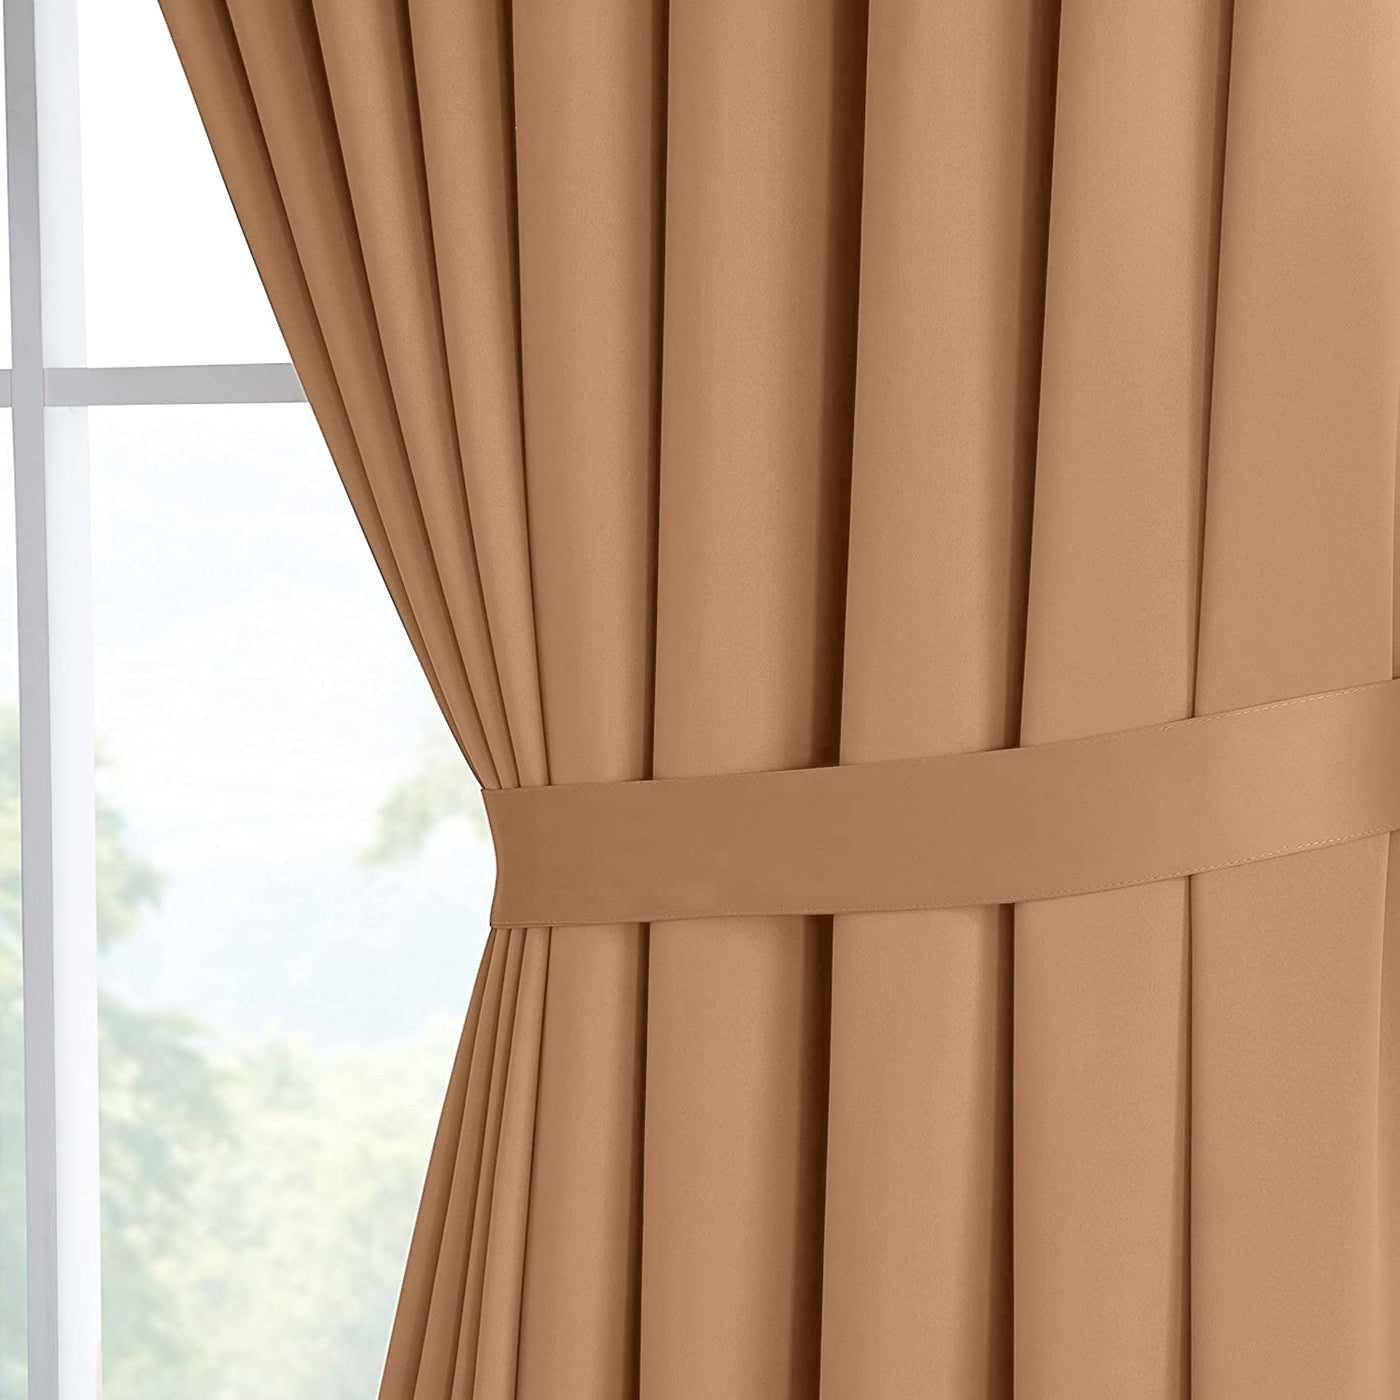 Blackout Ready Made Eyelet Curtains Beige